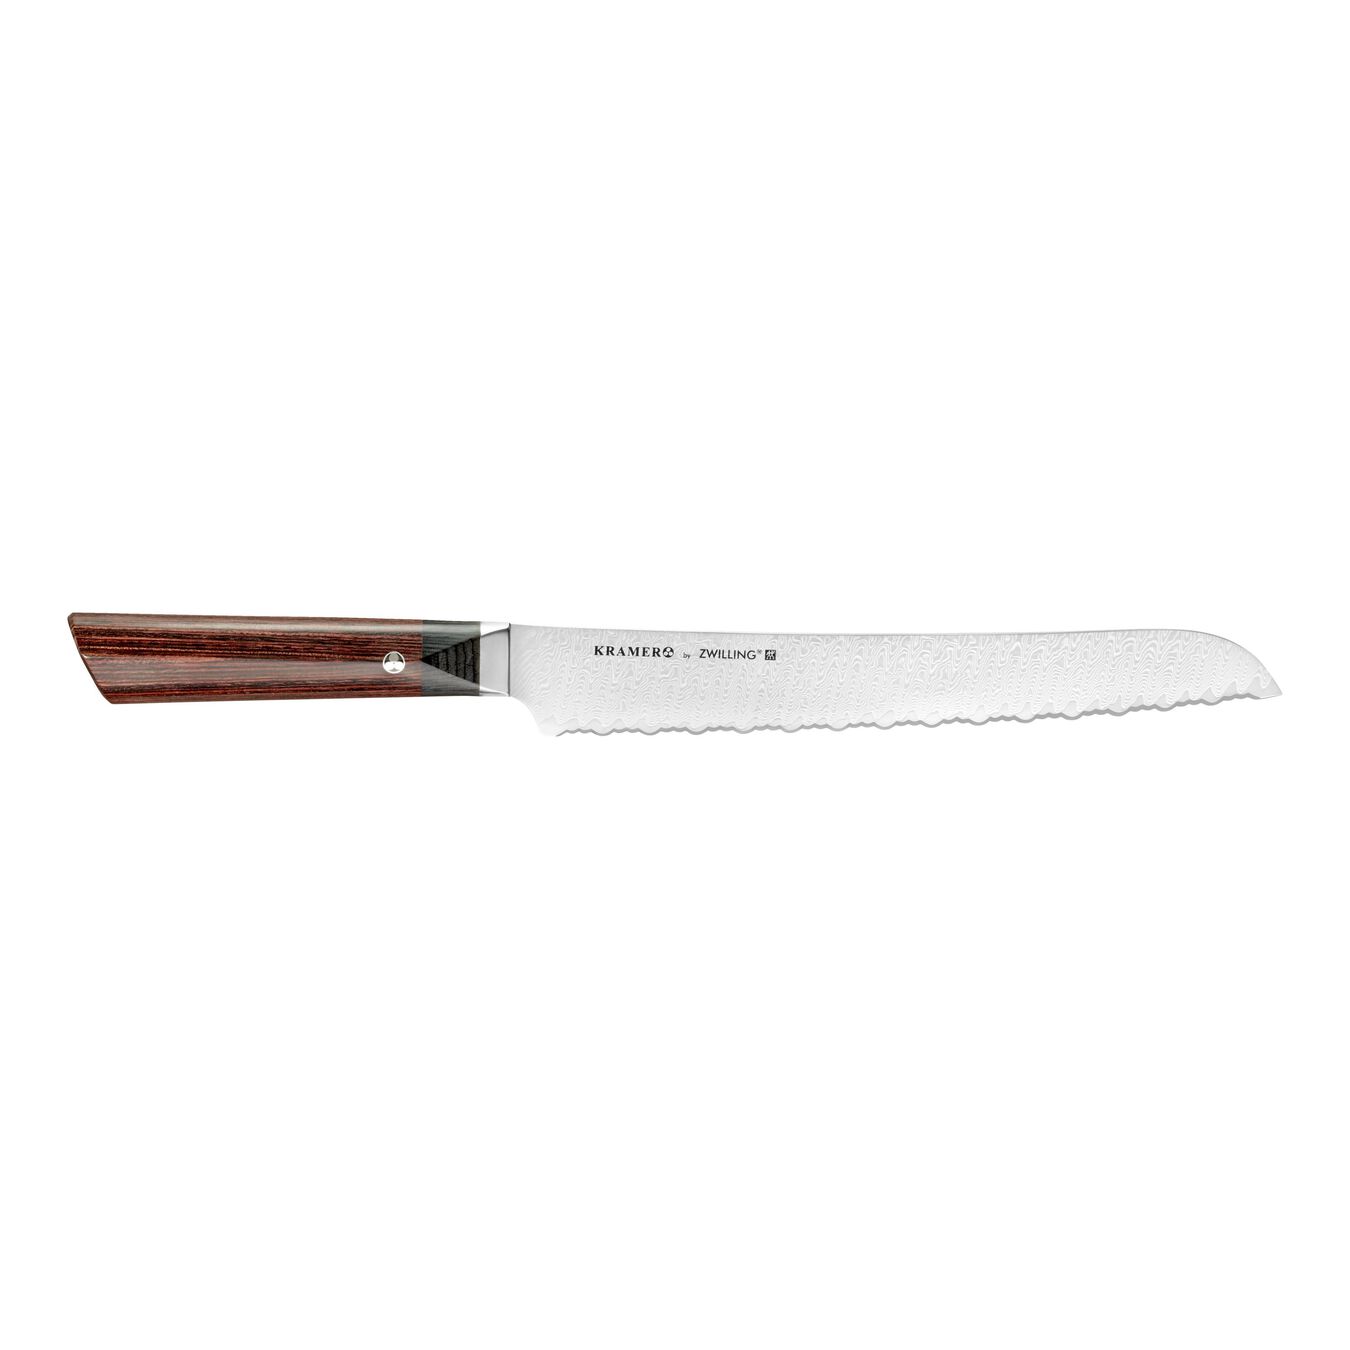 10 inch Bread knife,,large 1